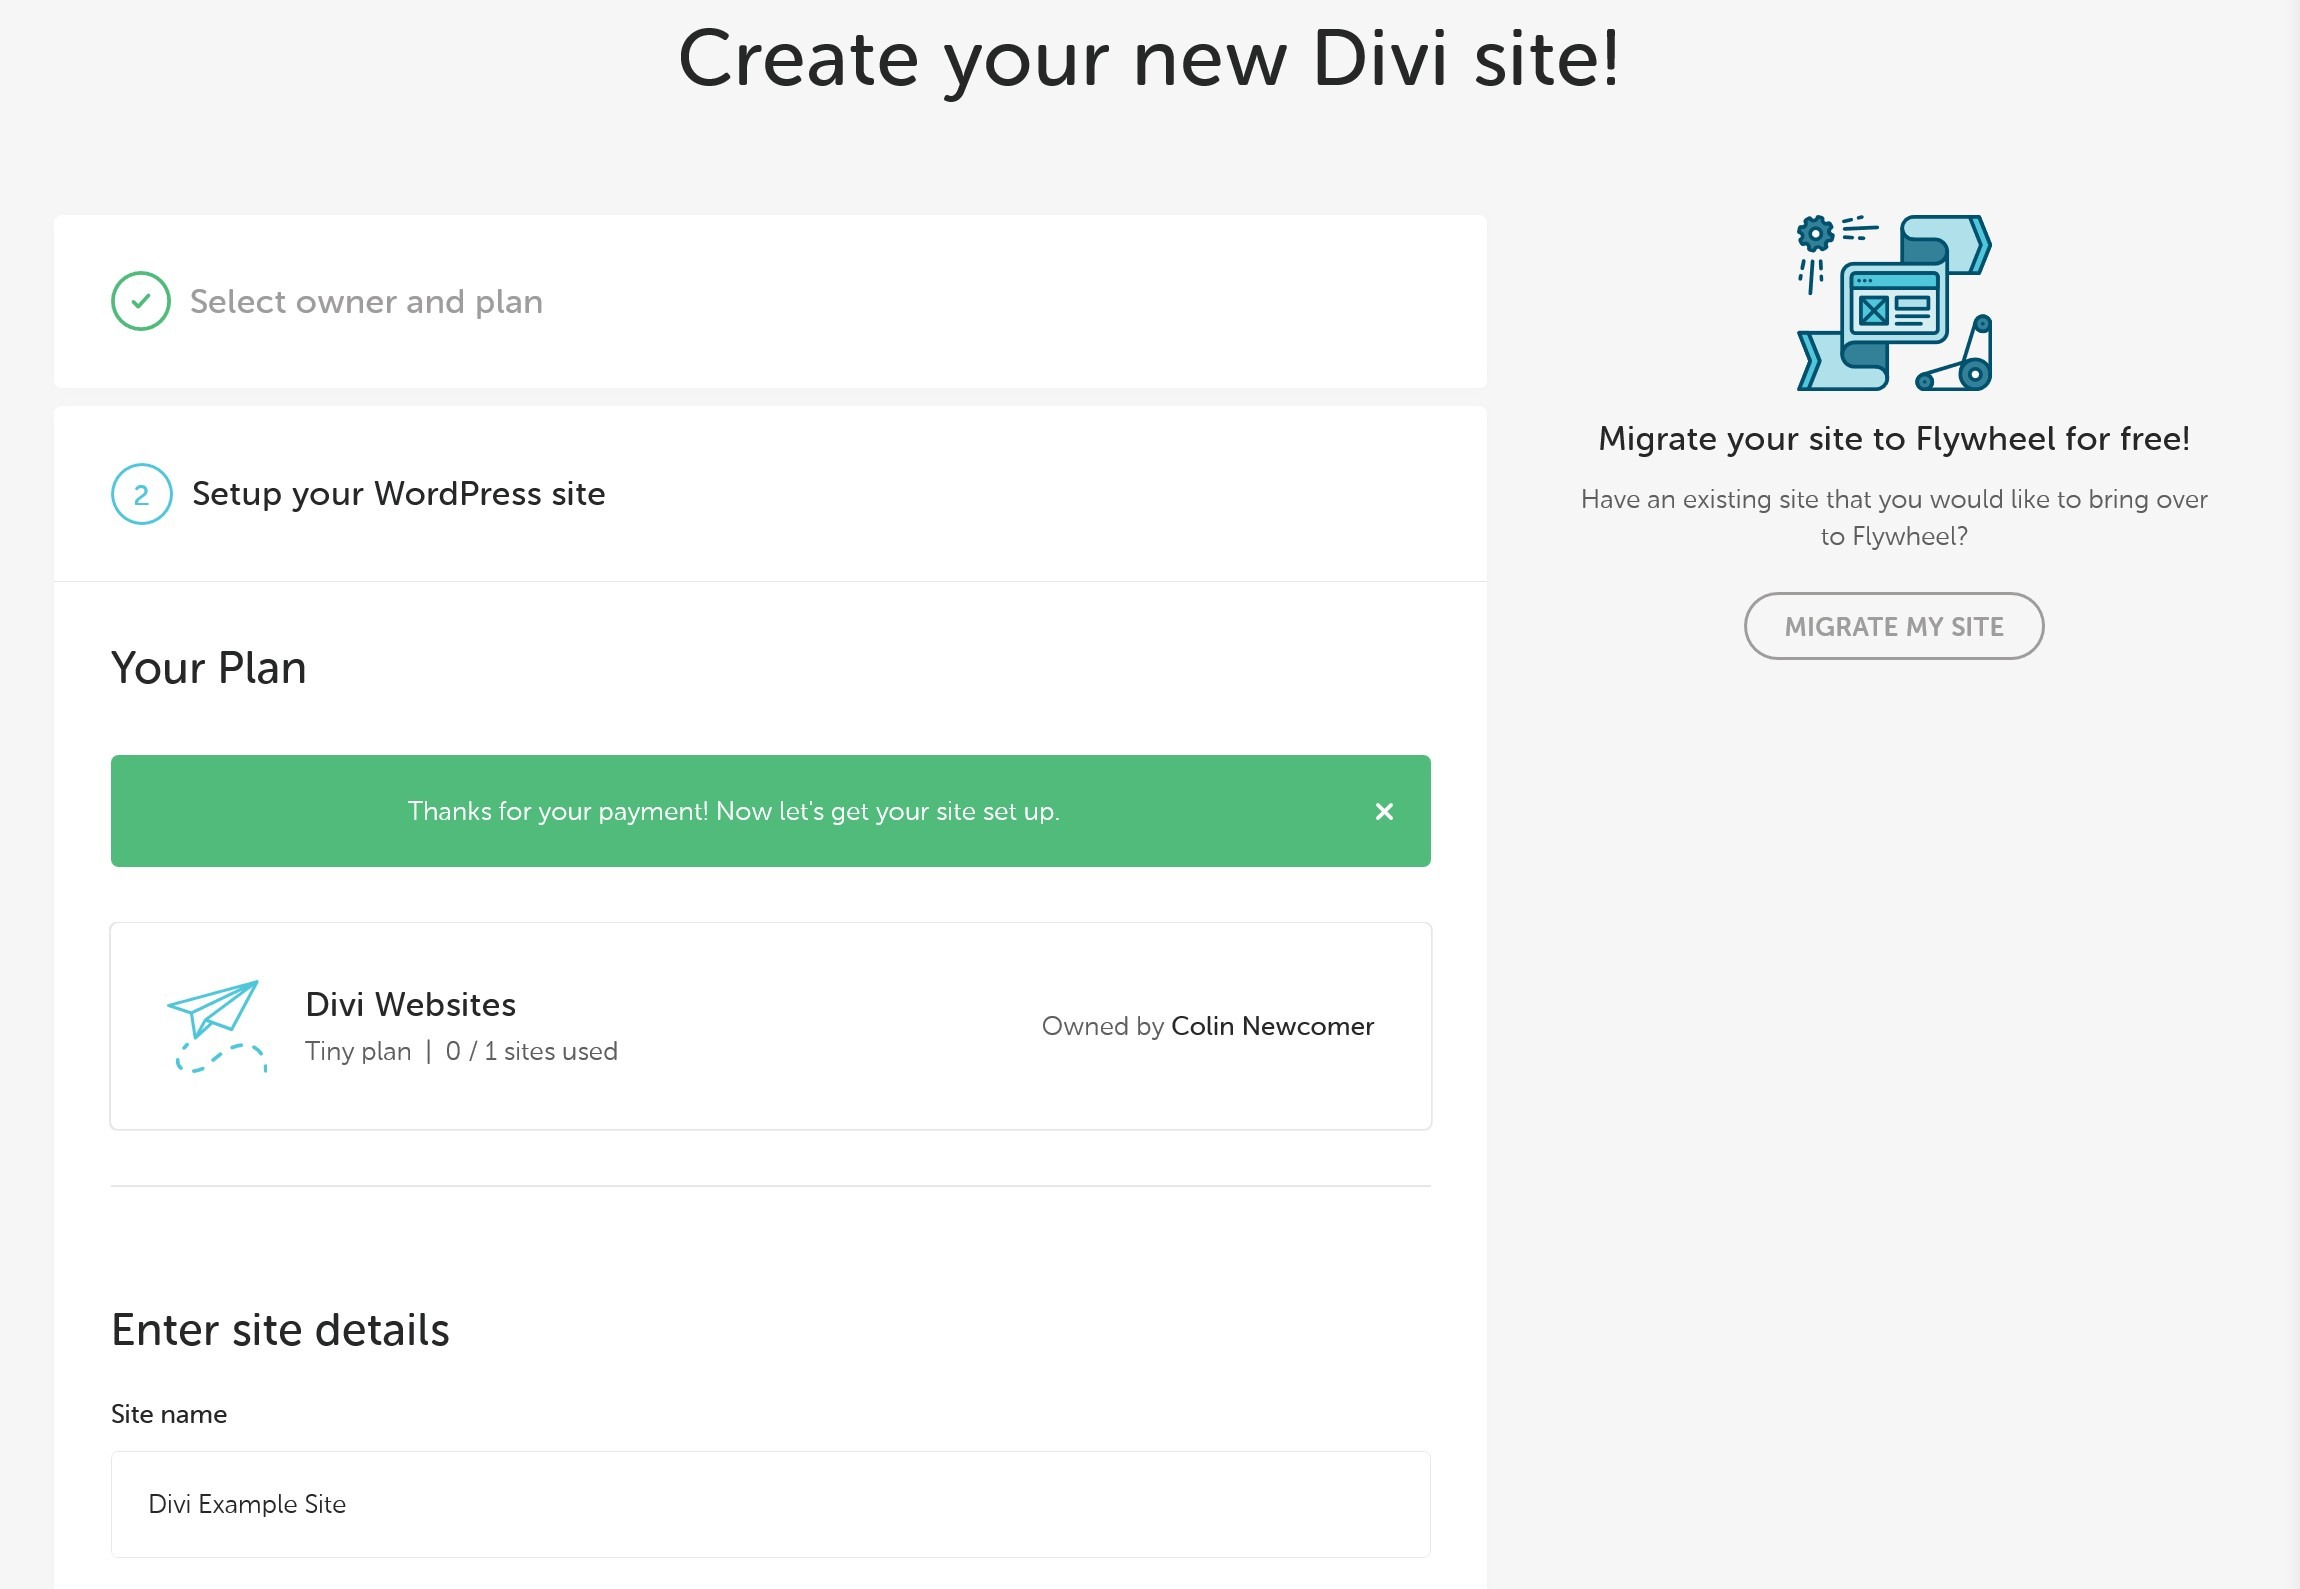 Flywheel will pre-install Divi for you